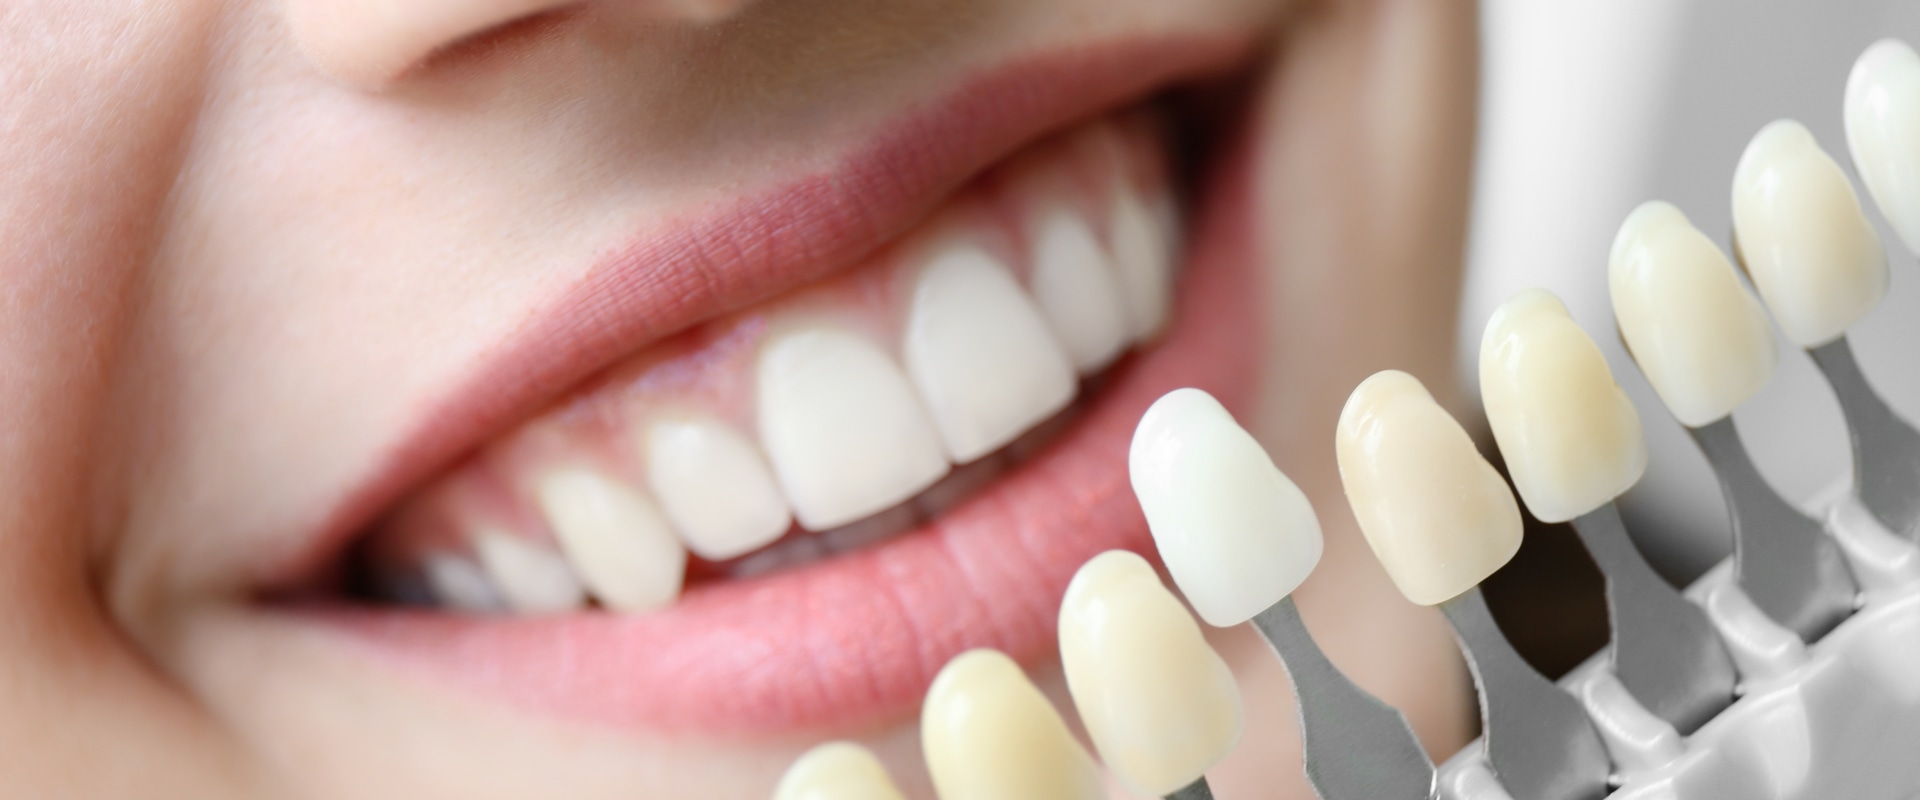 What is involved in cosmetic dentistry?